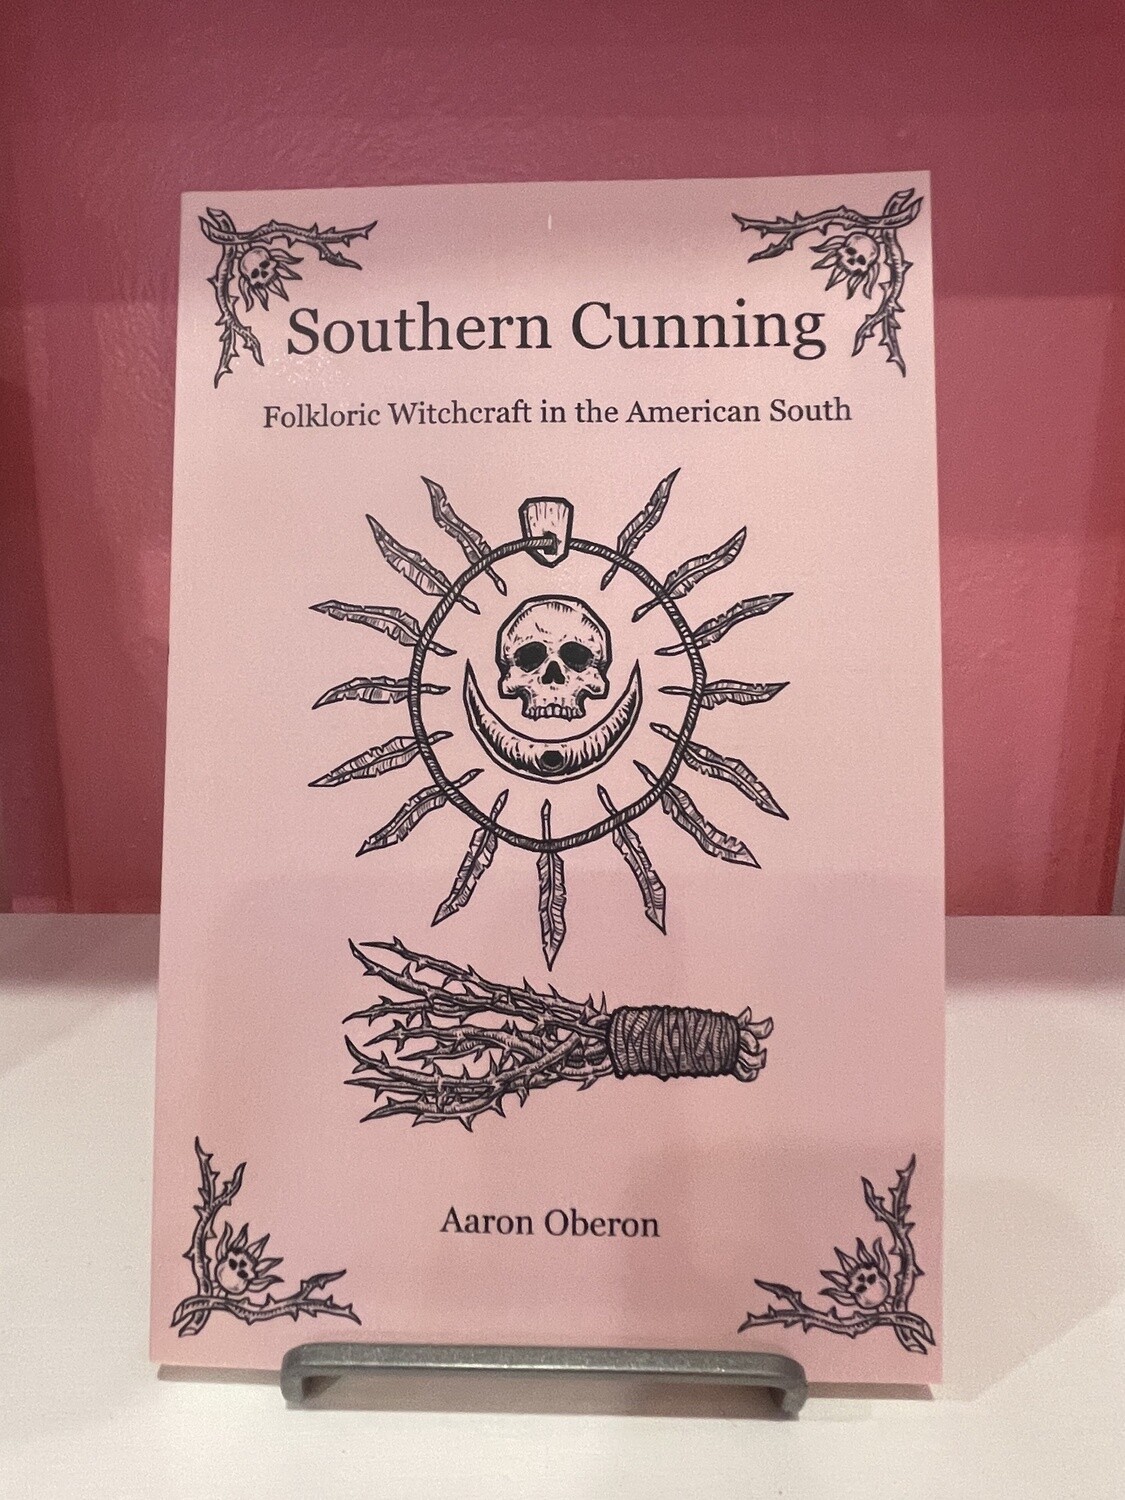 Southern Cunning: Folkloric Witchcraft in the American South